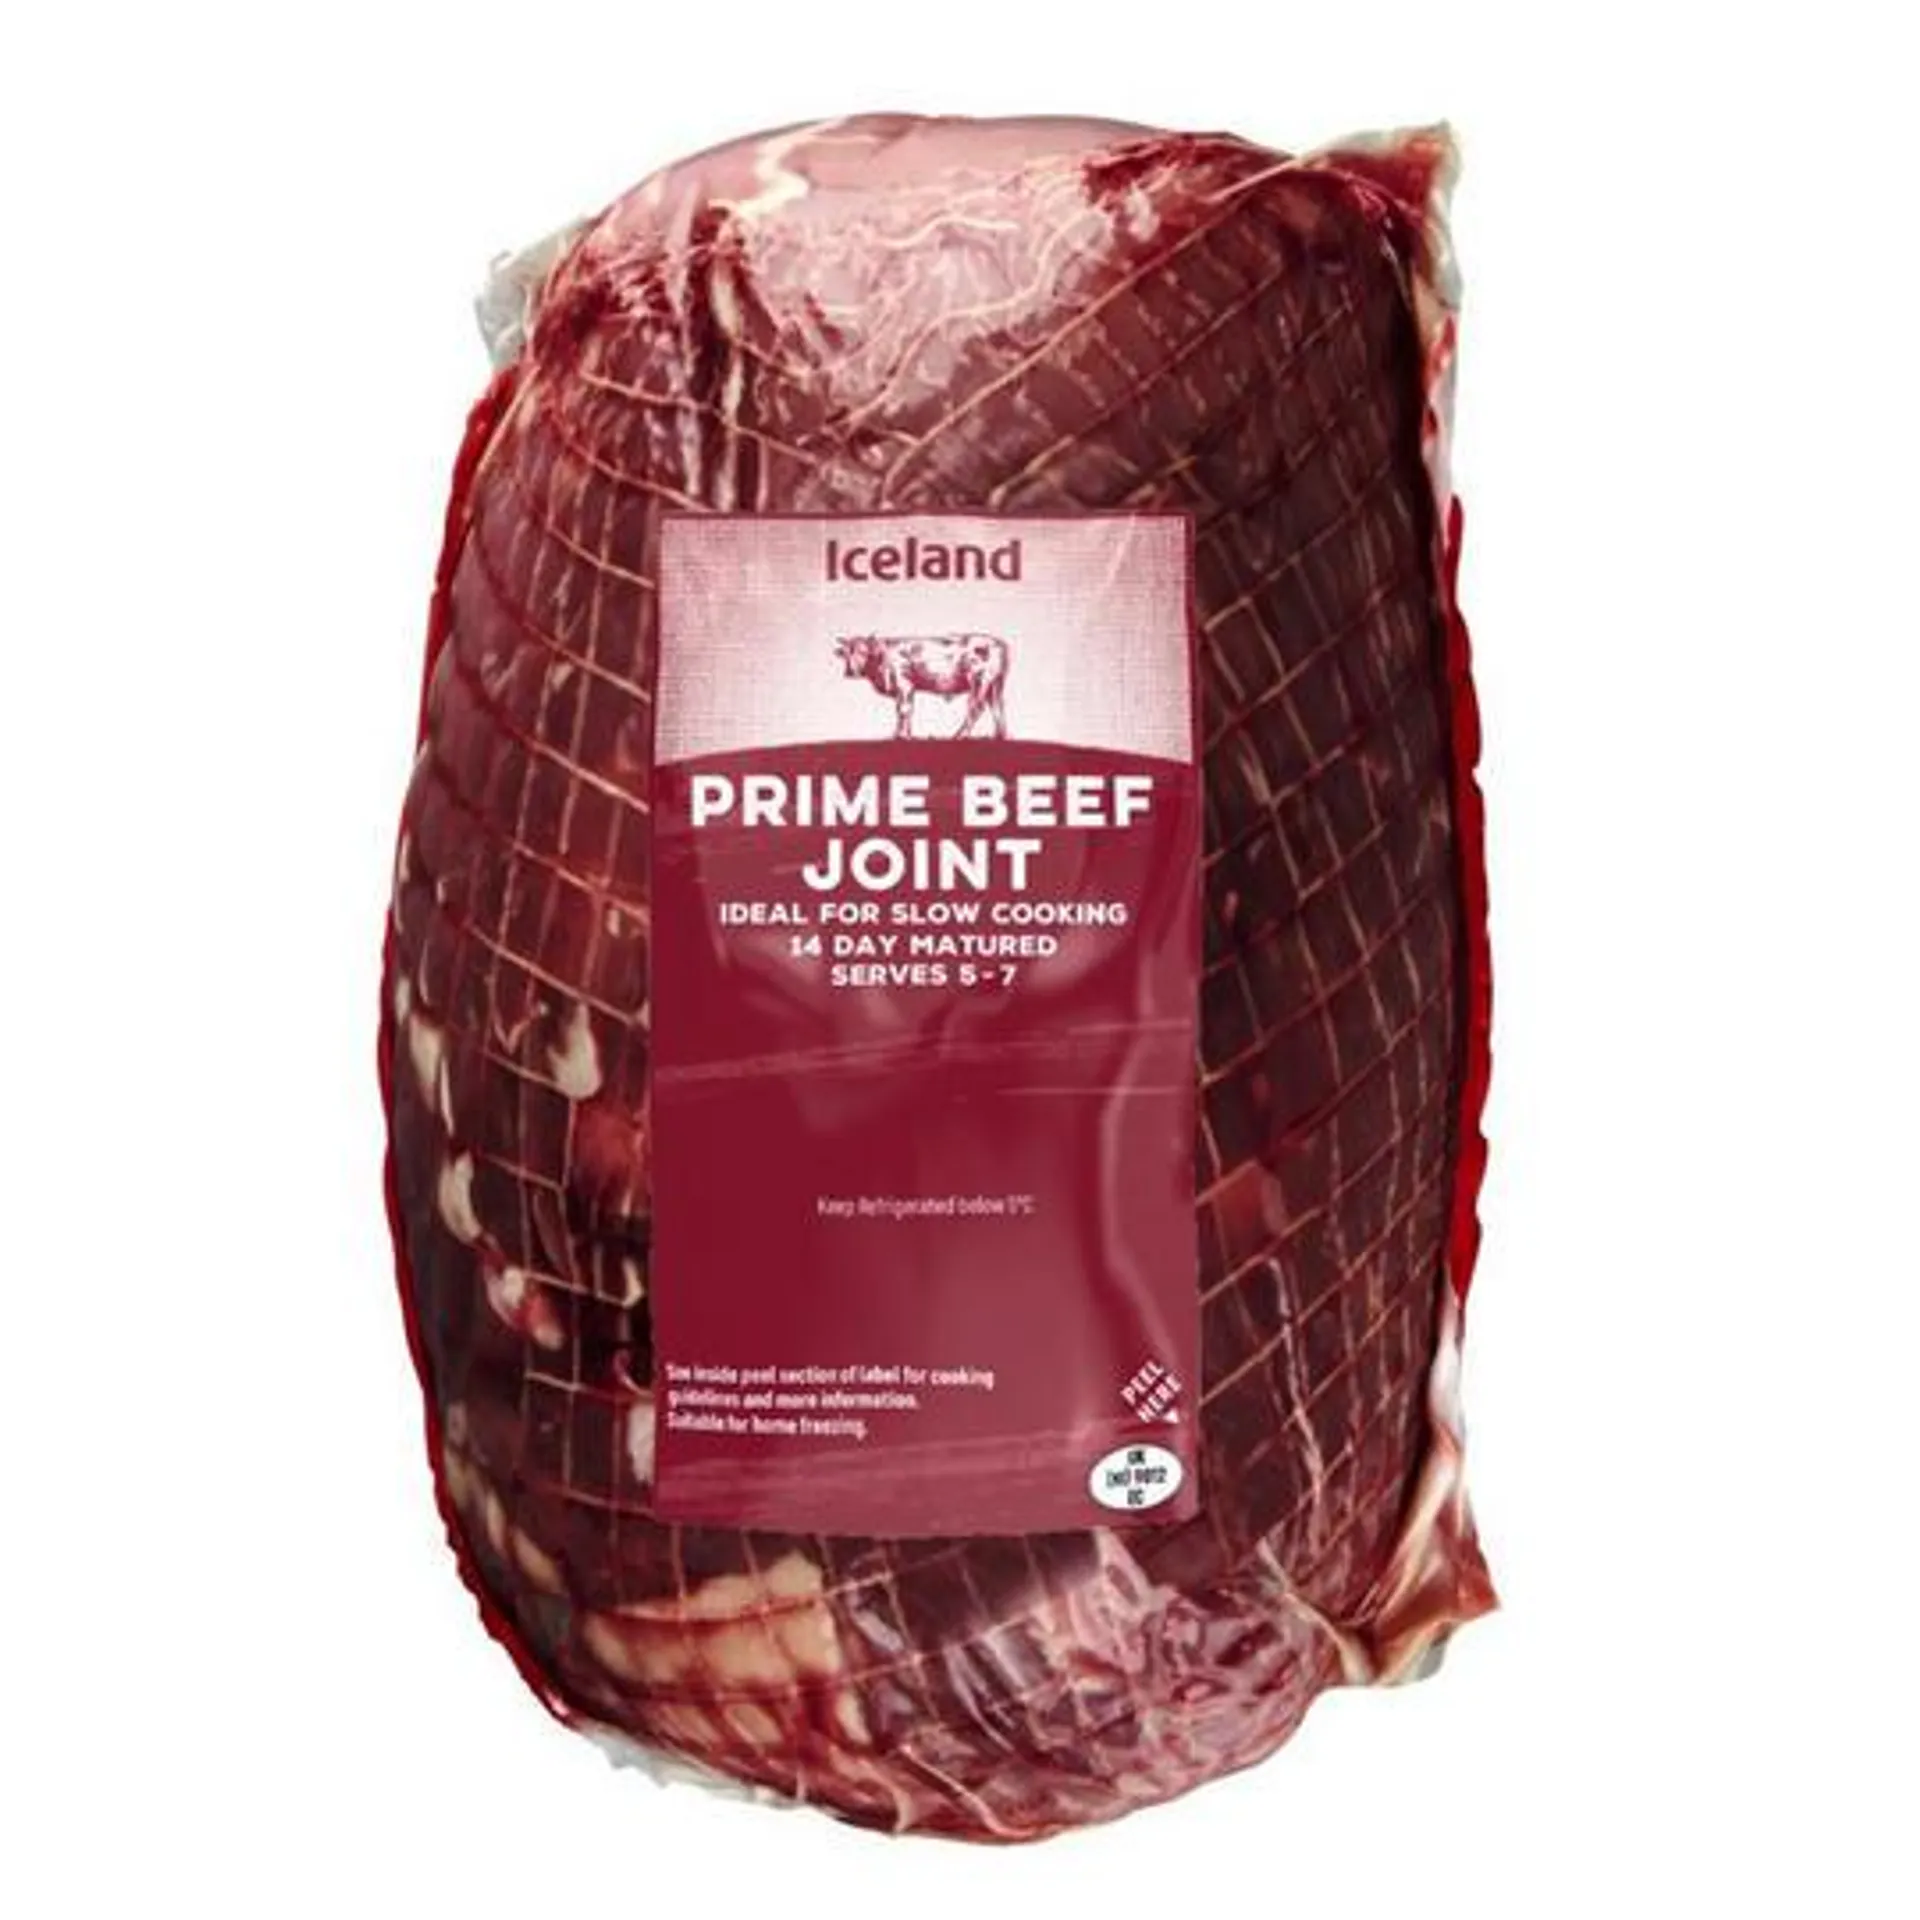 Iceland Prime Beef Joint 14 Day Matured 800g - 1.1kg